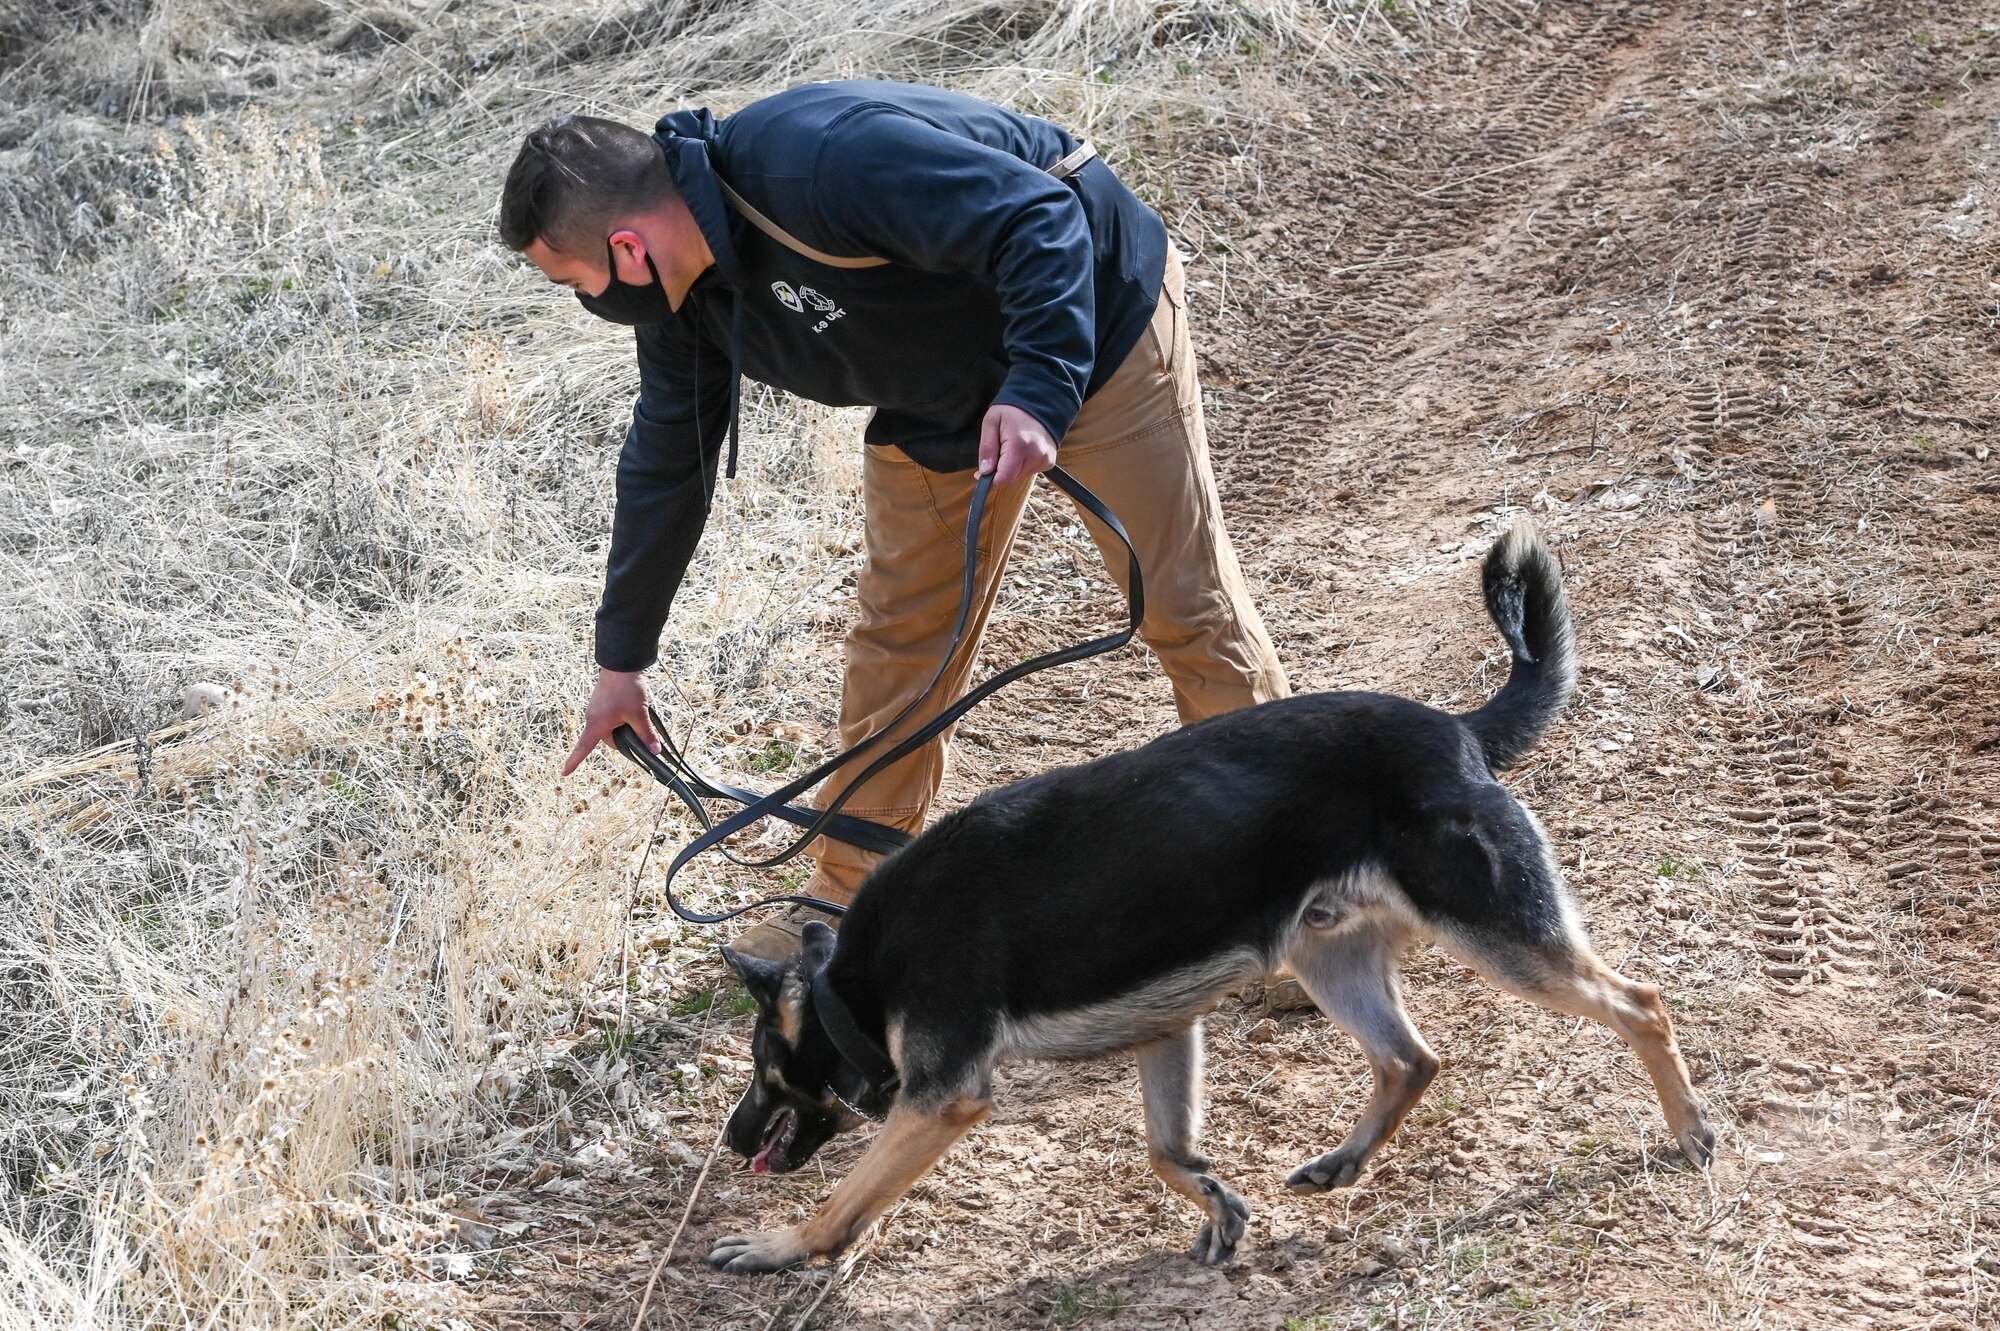 Staff Sgt. Juan Reyes and Military Working Dog Fules, 75th Security Forces Squadron, search for explosive making materials during training March 10, 2021, at Hill Air Force Base, Utah. (U.S. Air Force photo by Cynthia Griggs)